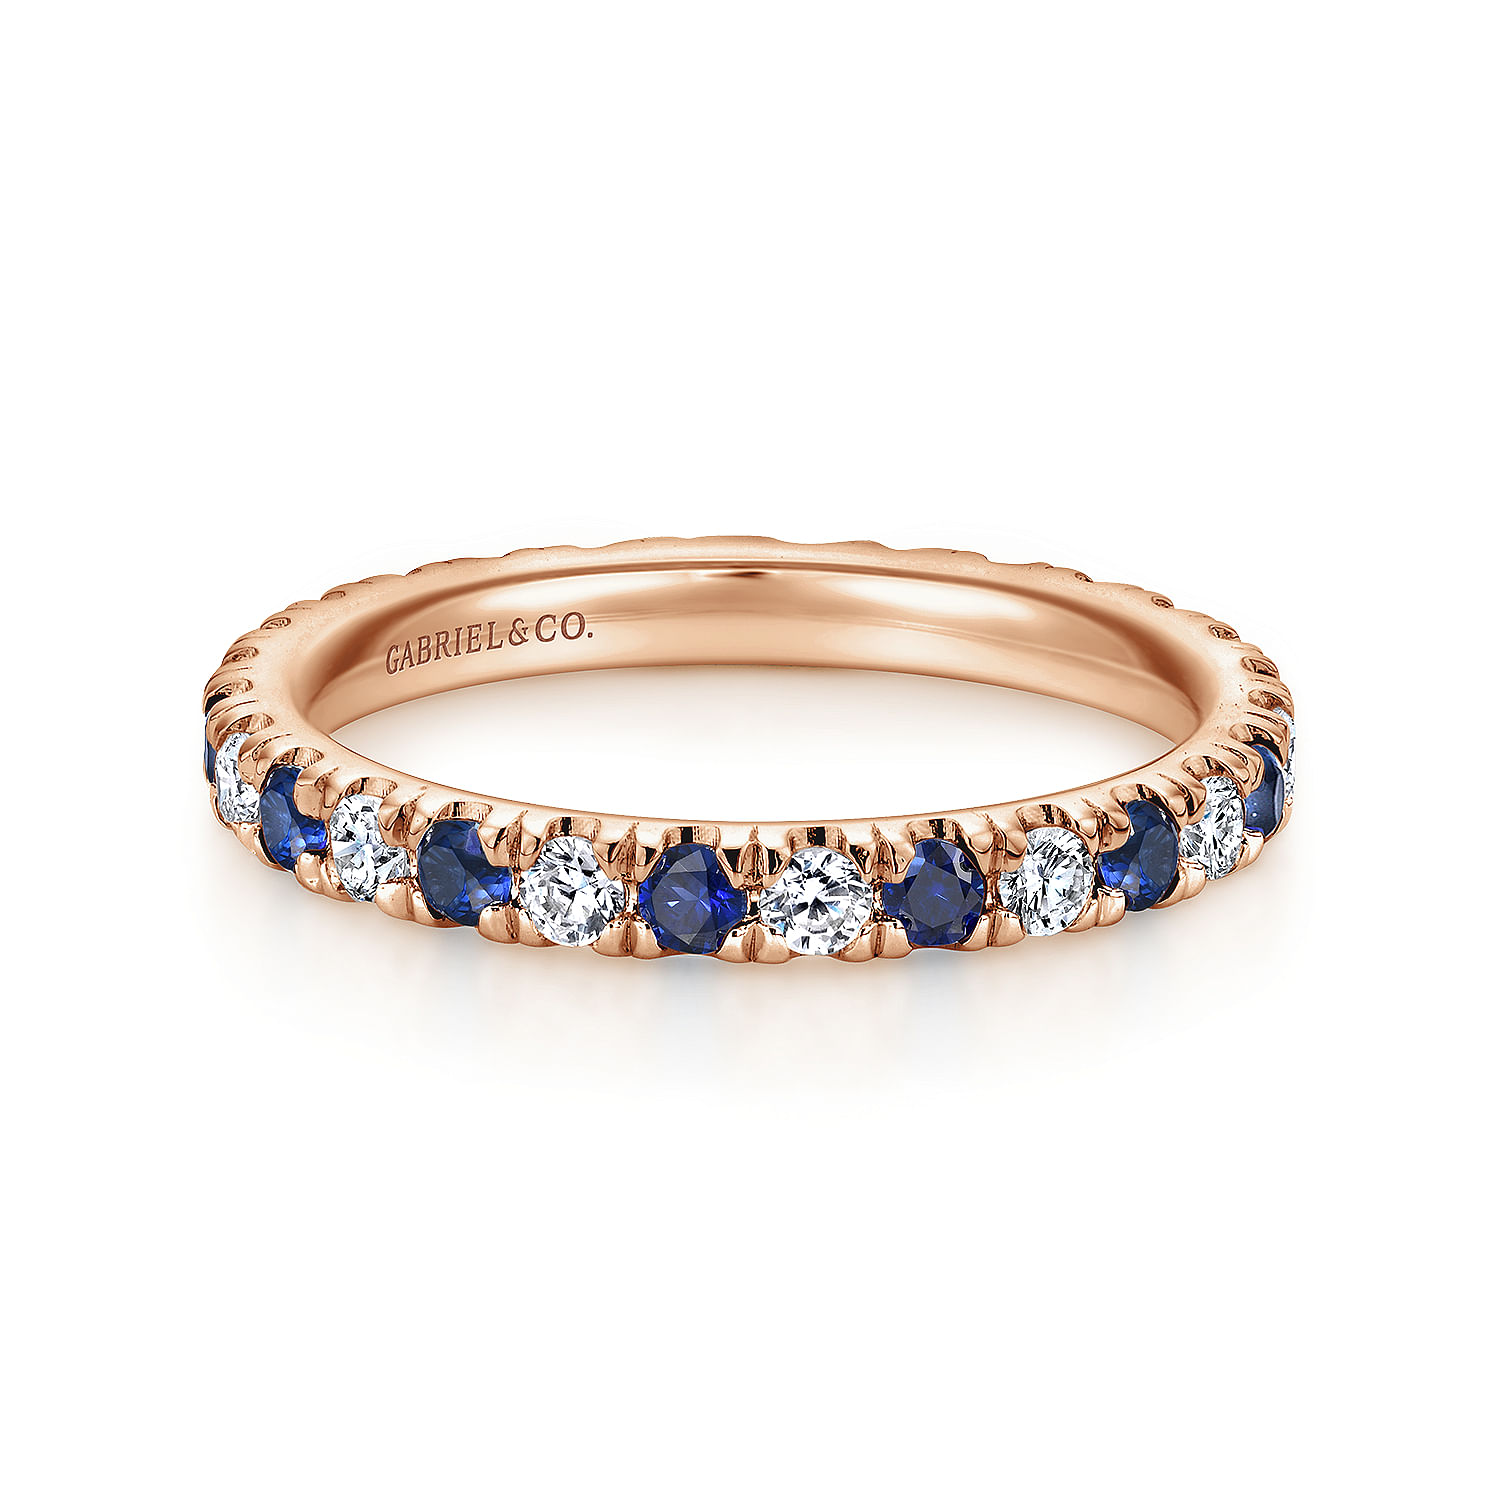 French Pavé  Eternity Sapphire and Diamond Ring in 14K Rose Gold